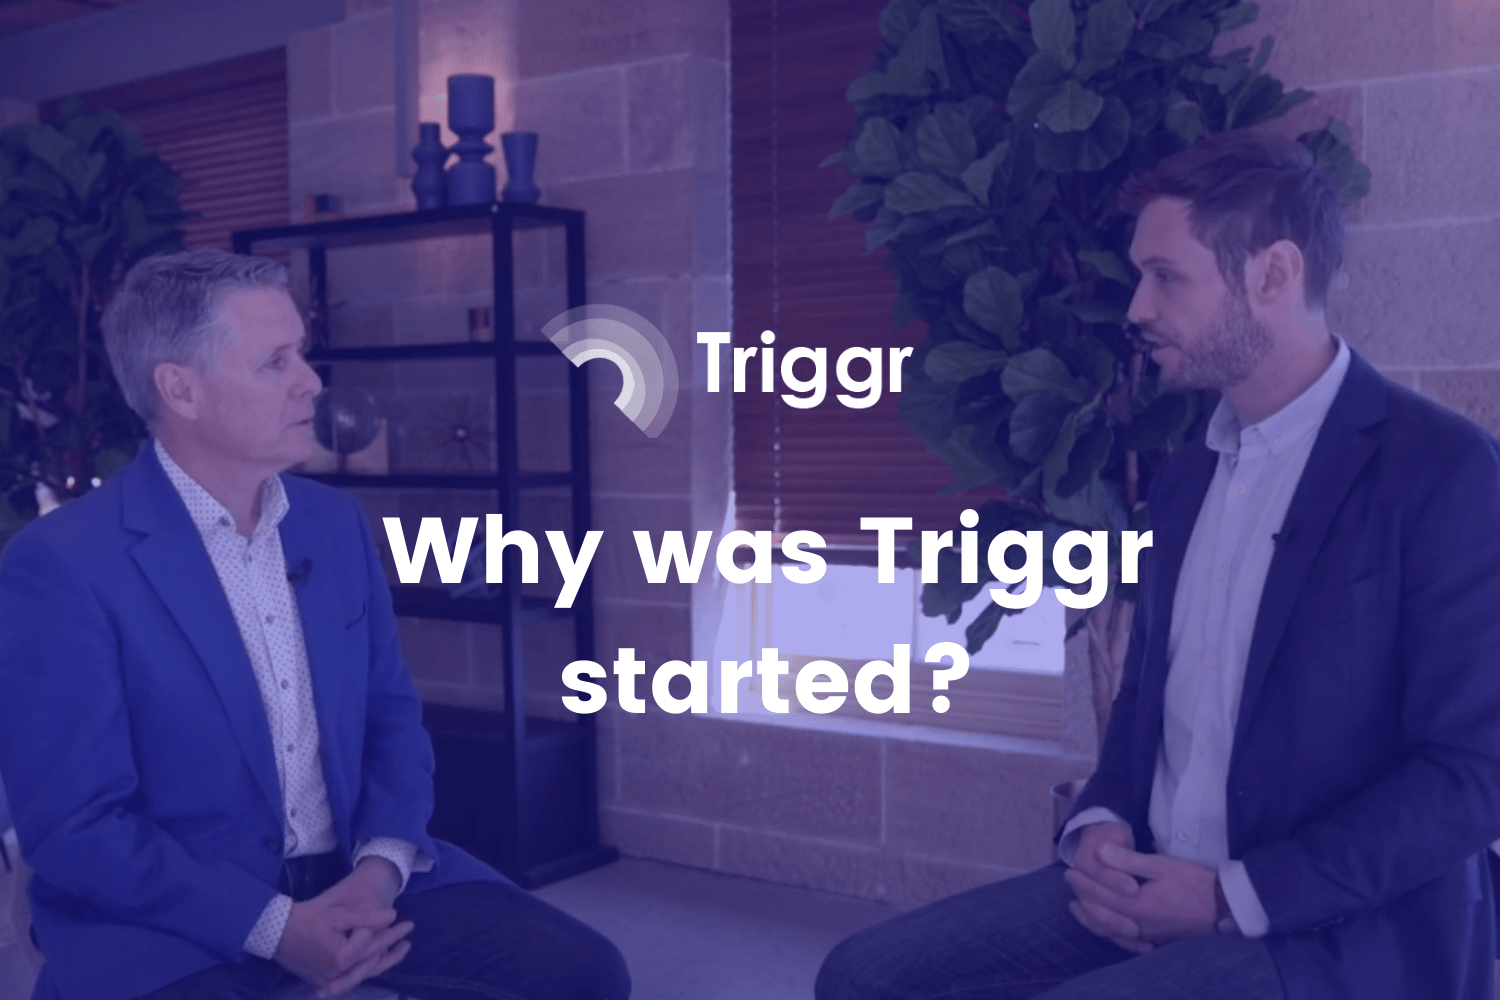 Why was Triggr started?